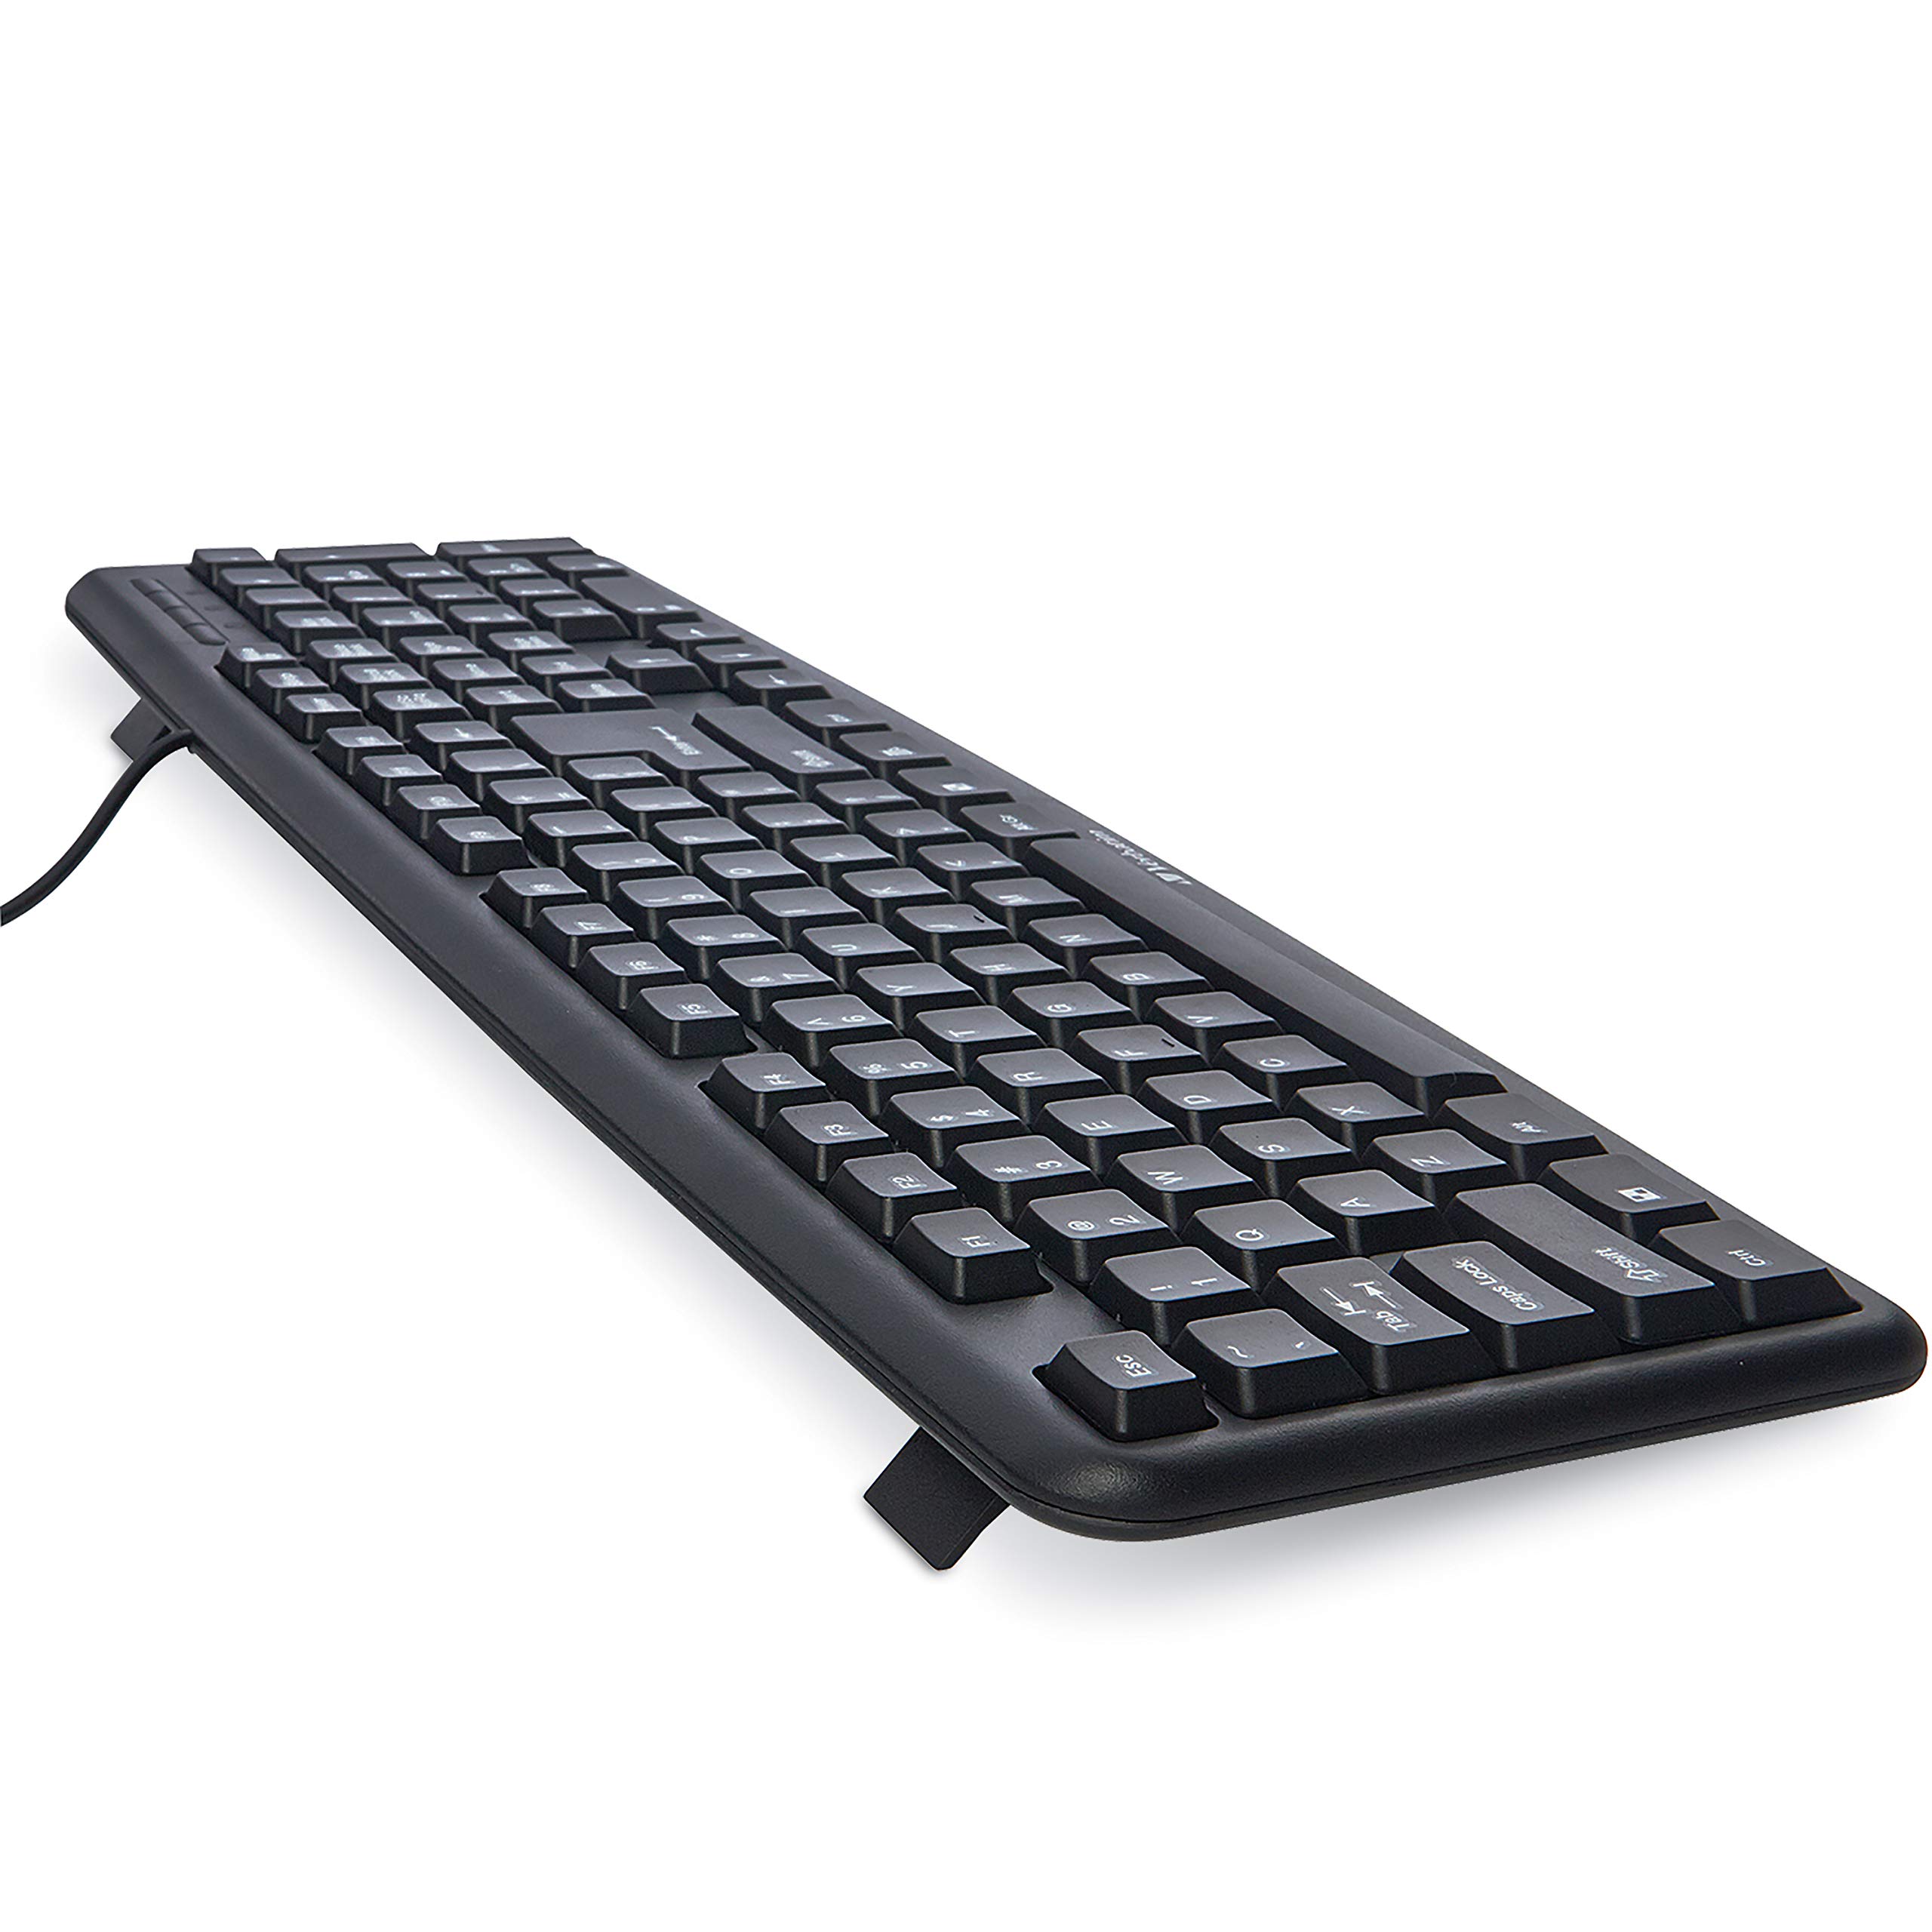 Verbatim Slimline Wired Keyboard and Mouse Combo USB Plug-and-Play Numeric Keypad Adjustable Tilt Legs Optical Corded Mouse Full-Size Computer Keyboard Compatible with PC, Laptop - FFP Packaging Black